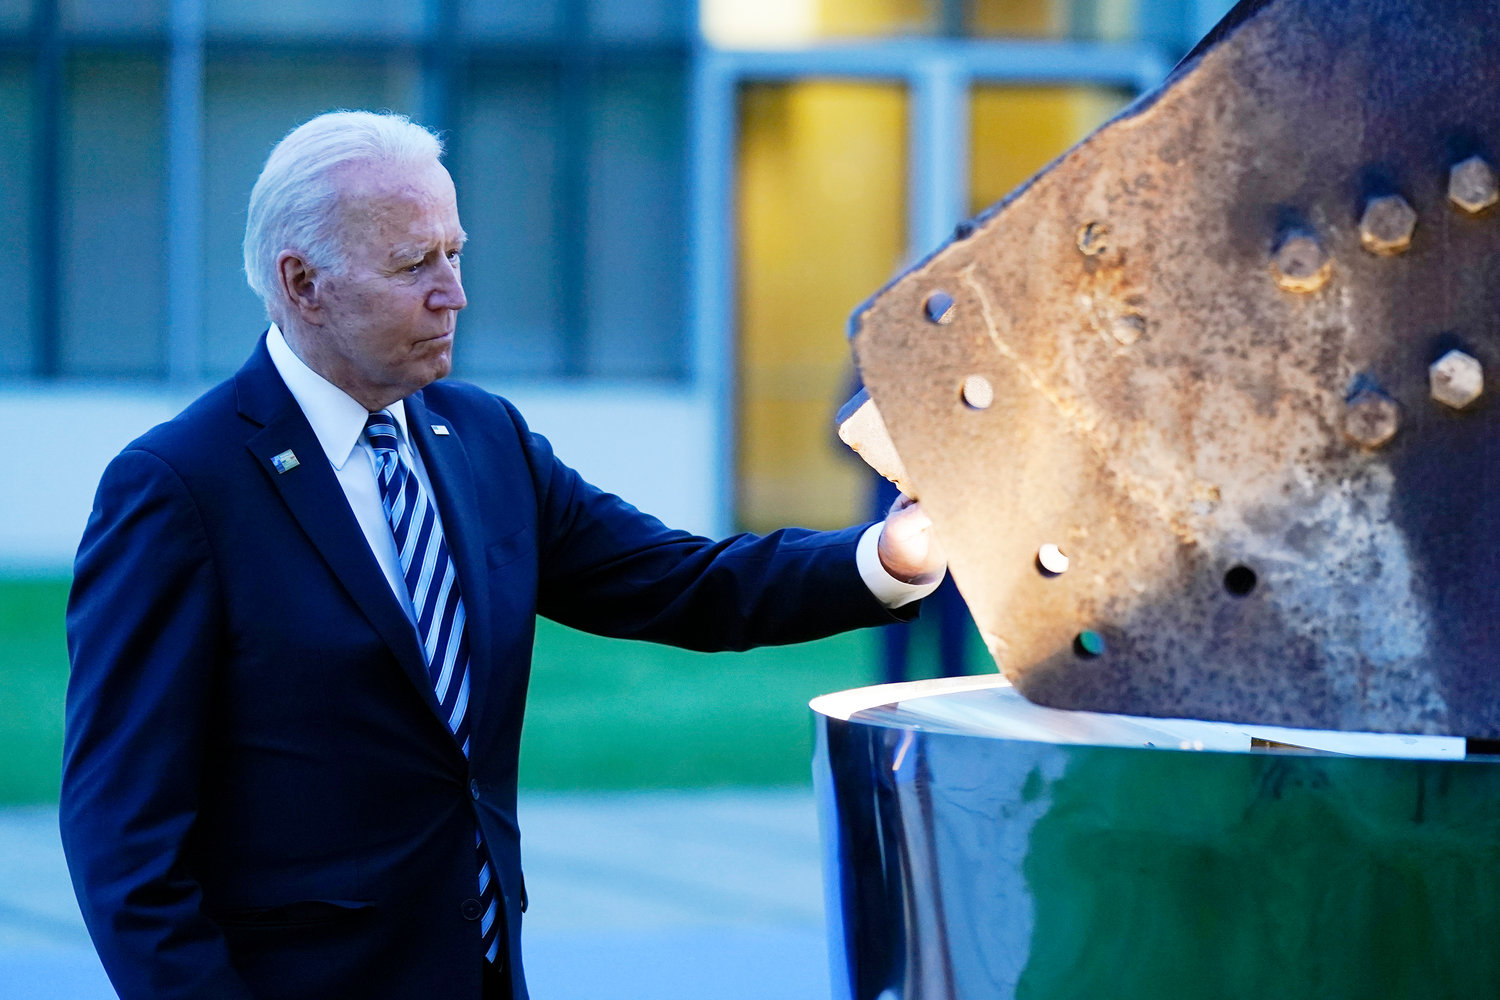 MEMORIES — President Joe Biden touches a piece of steel from the North Tower of the World Trade Center while visiting a memorial to the September 11 terrorist attacks at NATO headquarters in Brussels Monday.